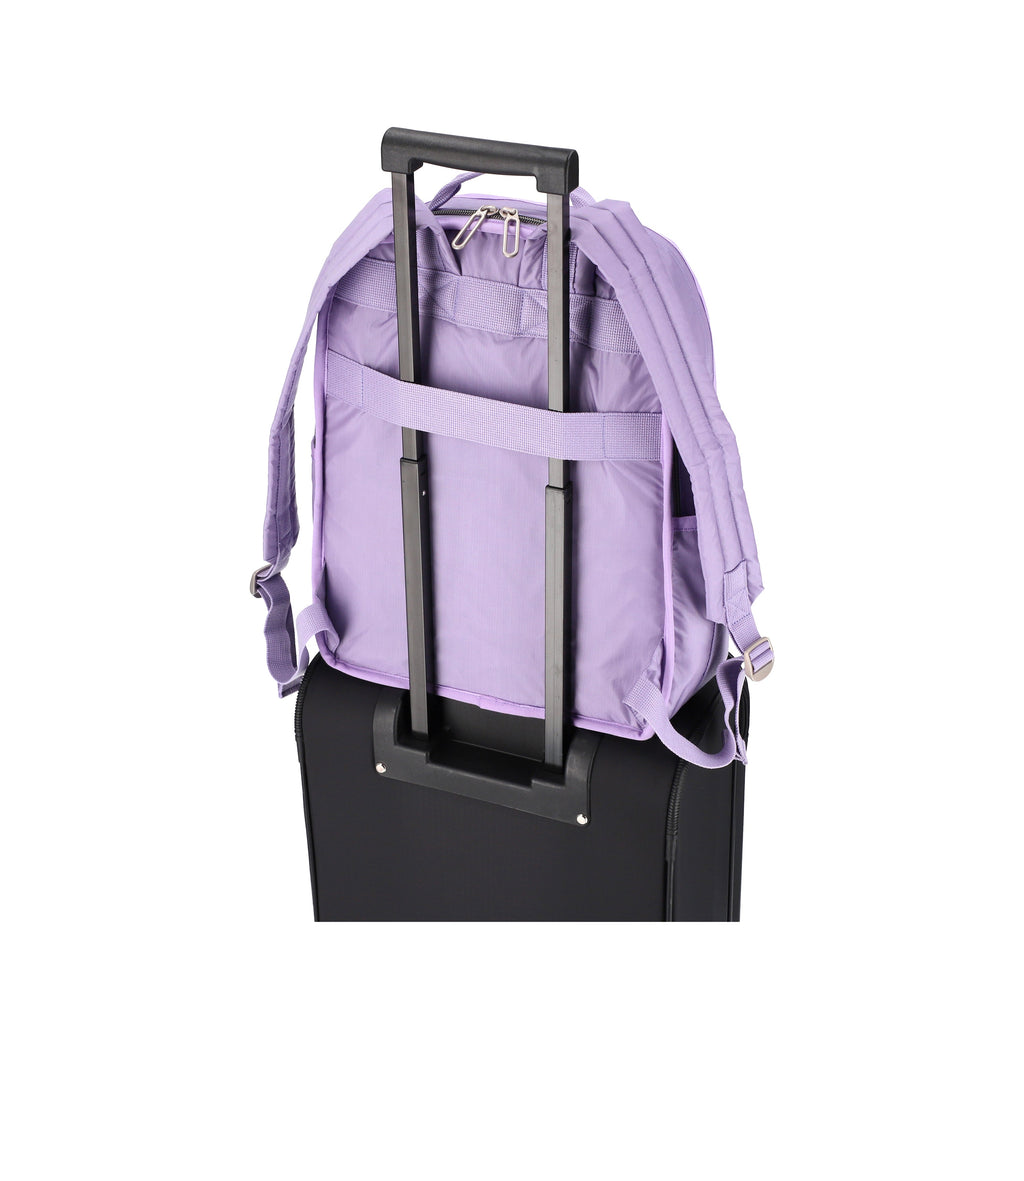 Essential Carryall Backpack - 23976604532784